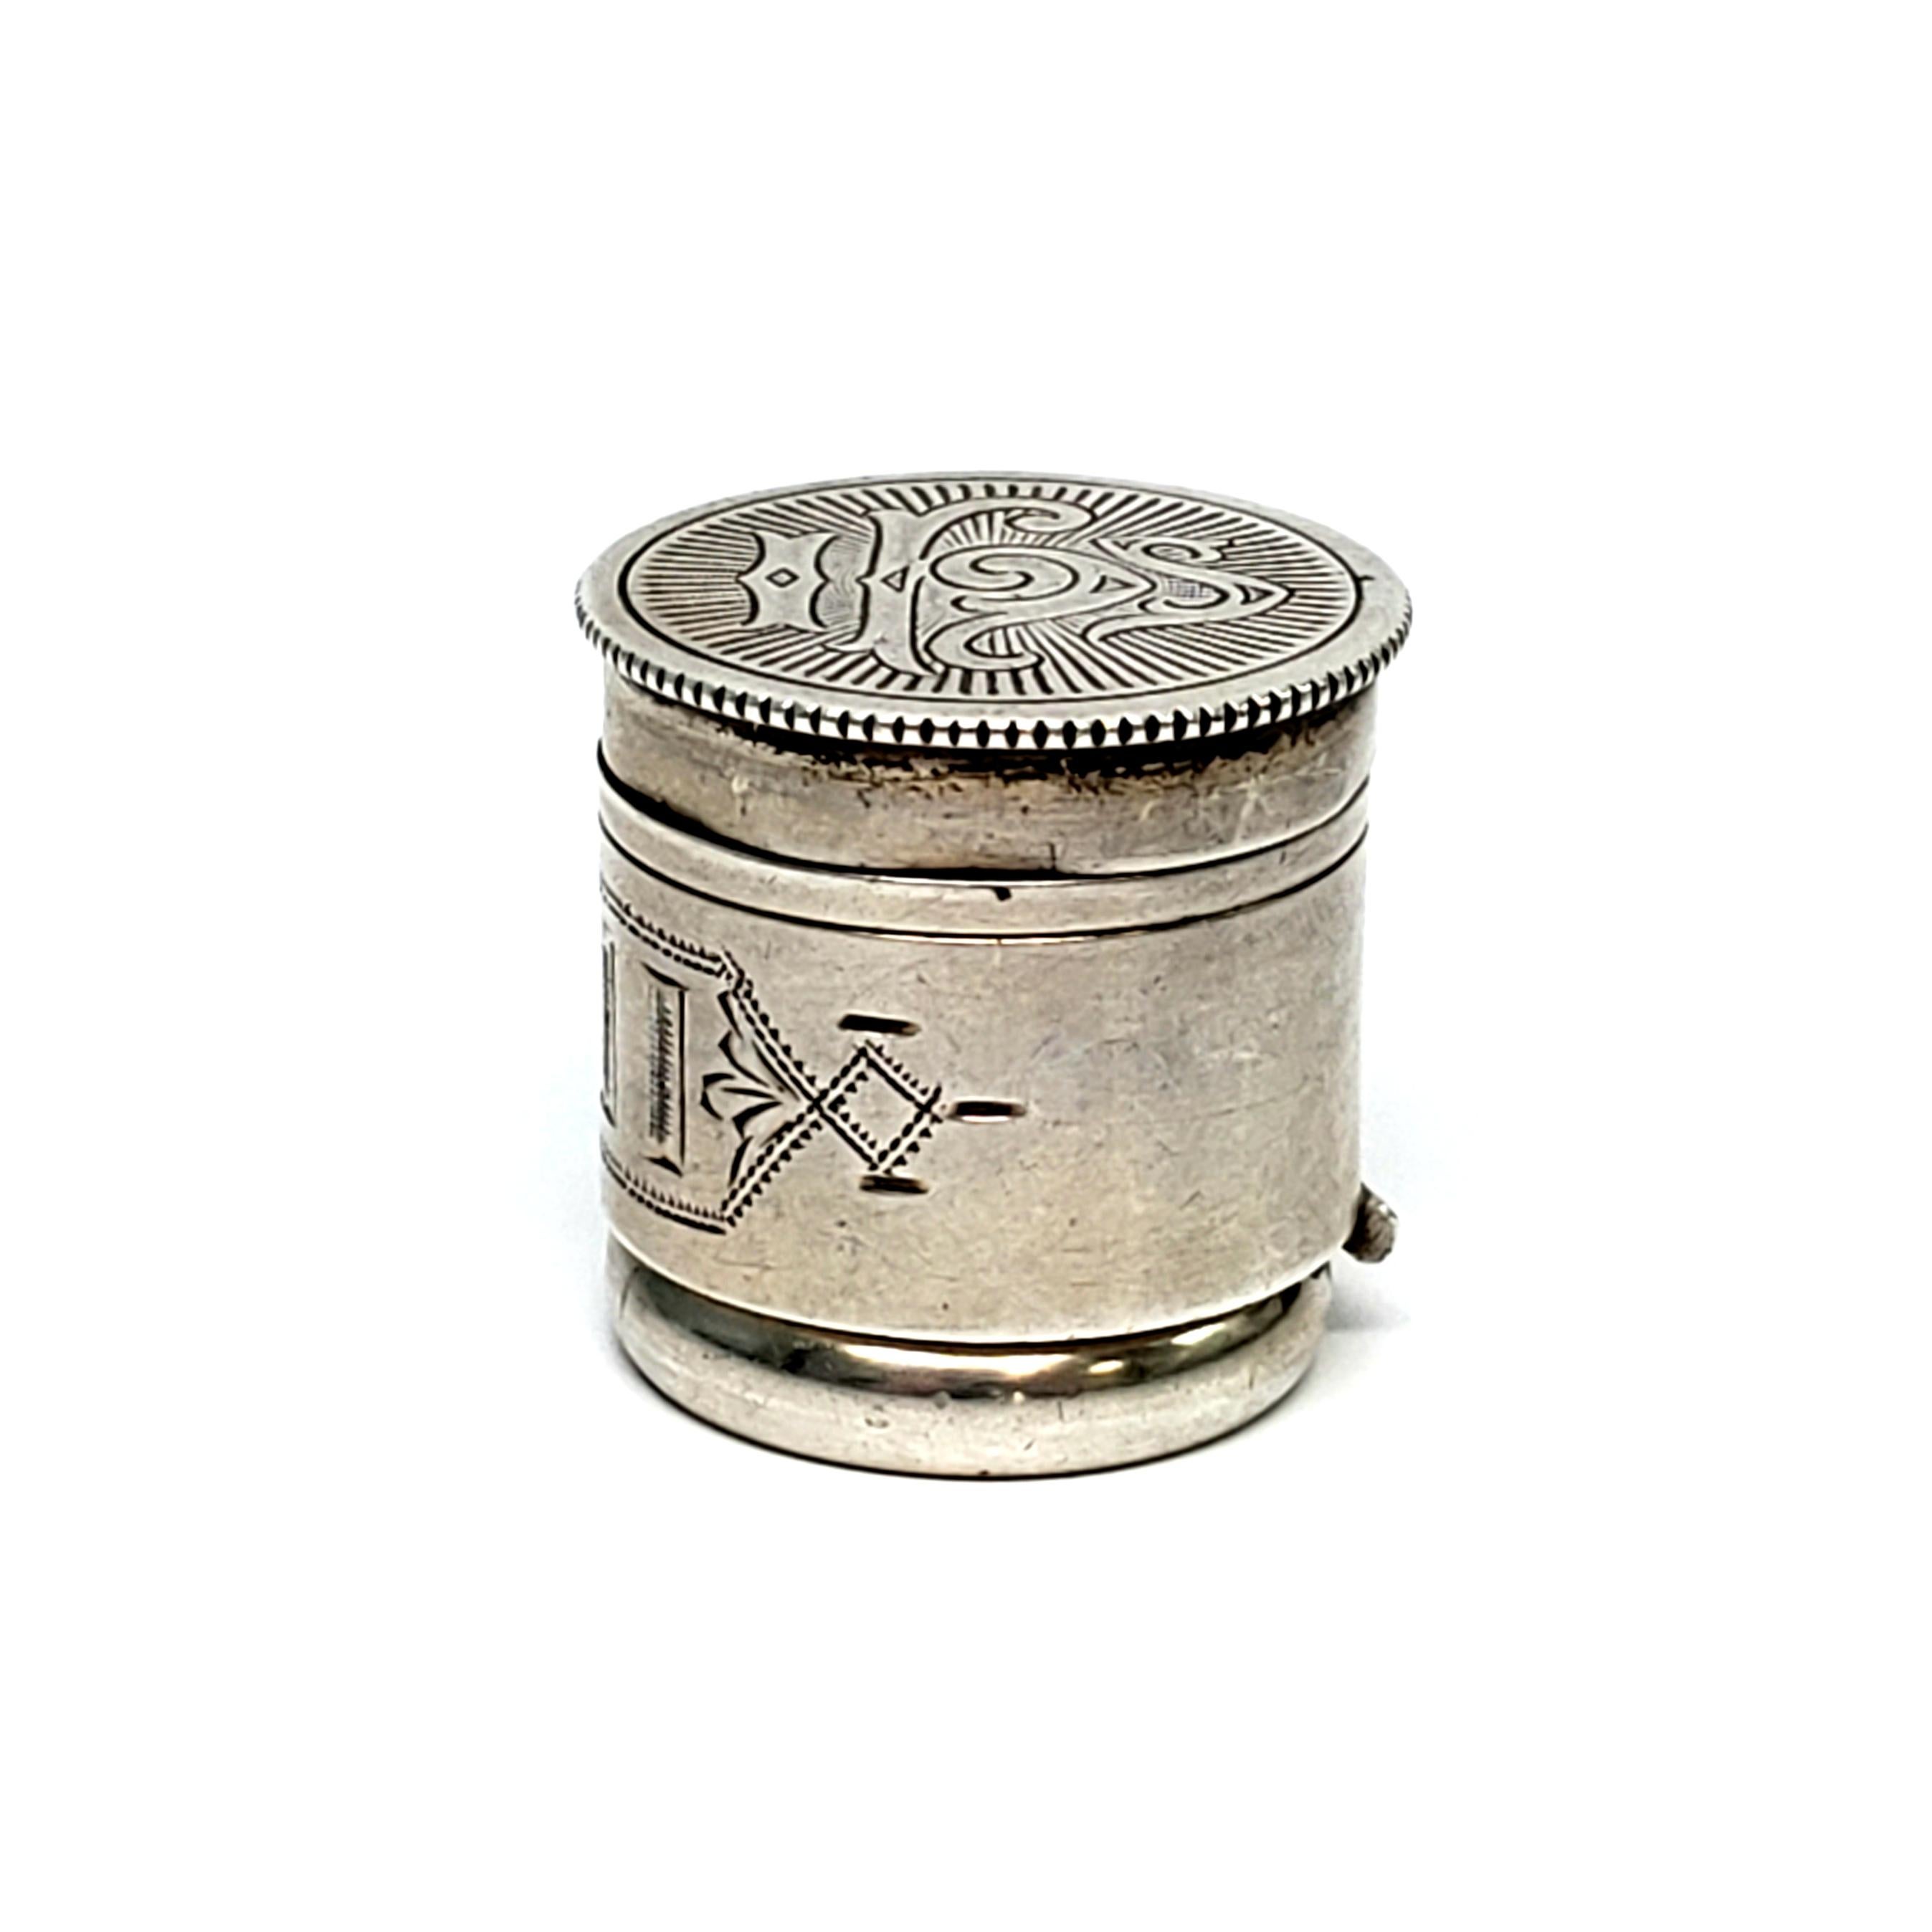 Antique sterling silver Anointing Oil Jar with Priest's ring by Swift & Fisher. Ring is a size 11.

Swift & Fisher, of Attleboro, MA, was known for their religious pieces. This jar is made for priests to conduct the sacrament of the anointing of the